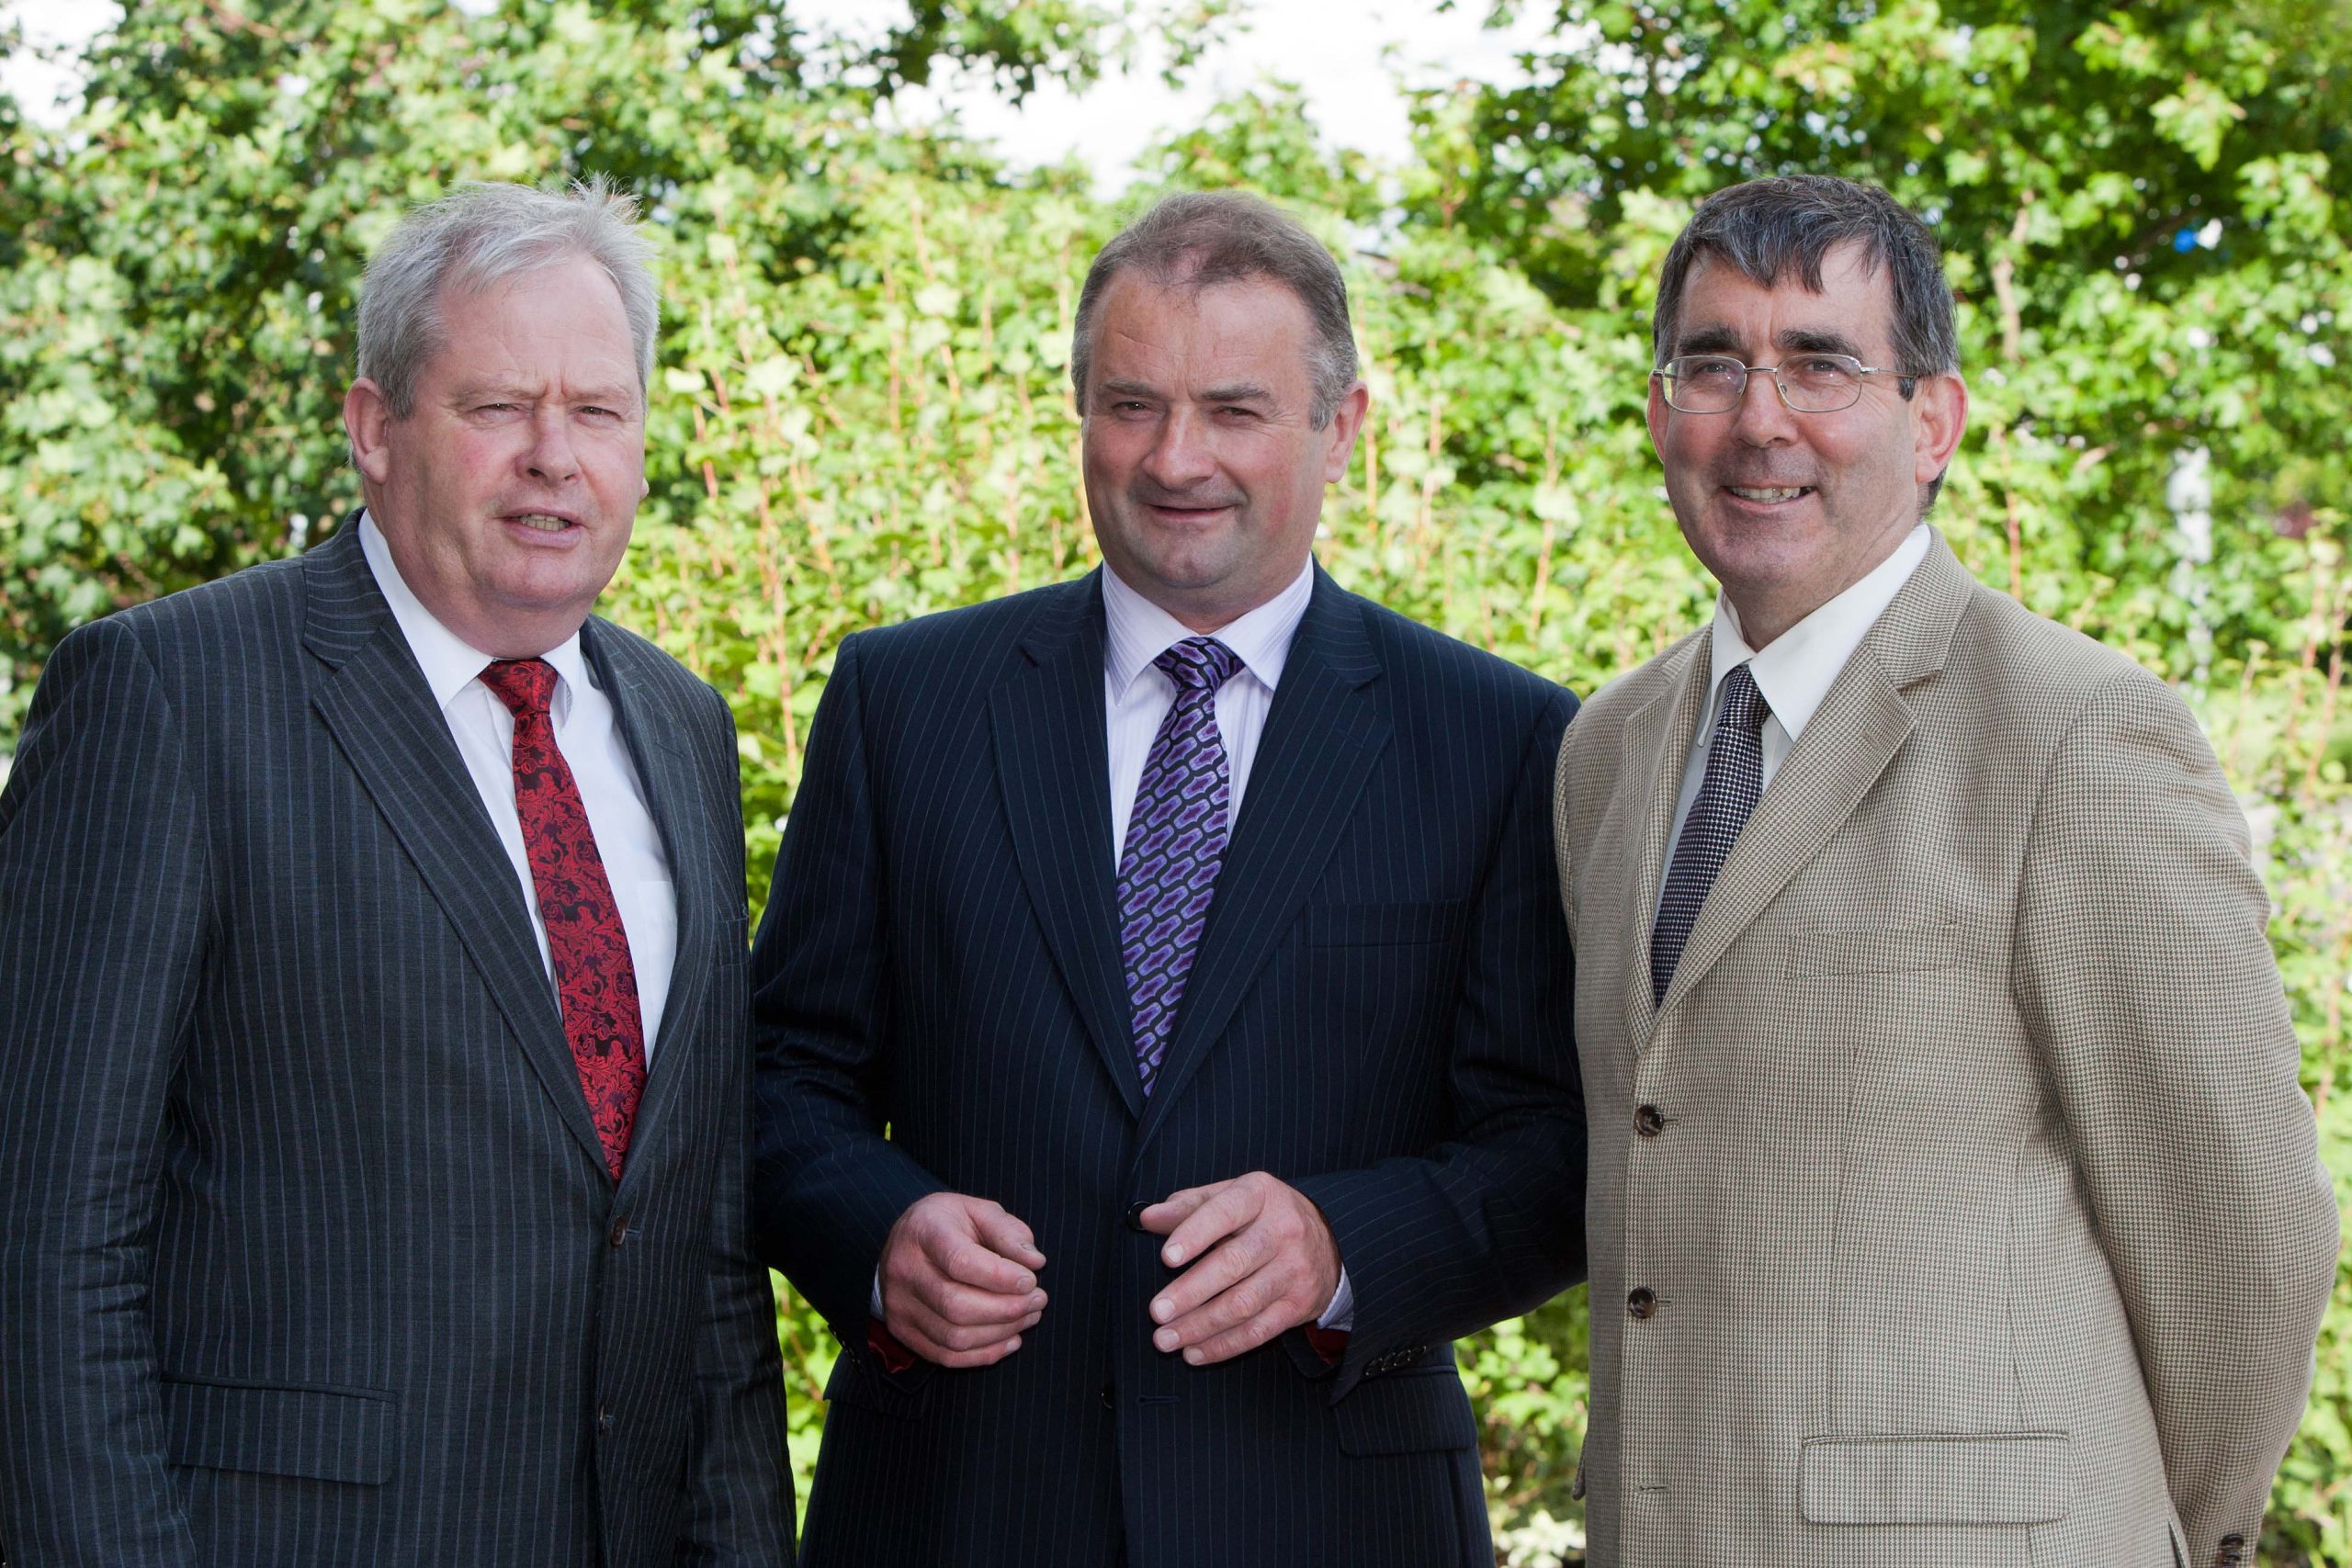 Image of Martin Keane, Vice President, Bertie O'Leary, President & Seamus O'Donohoe, CEO ICOS